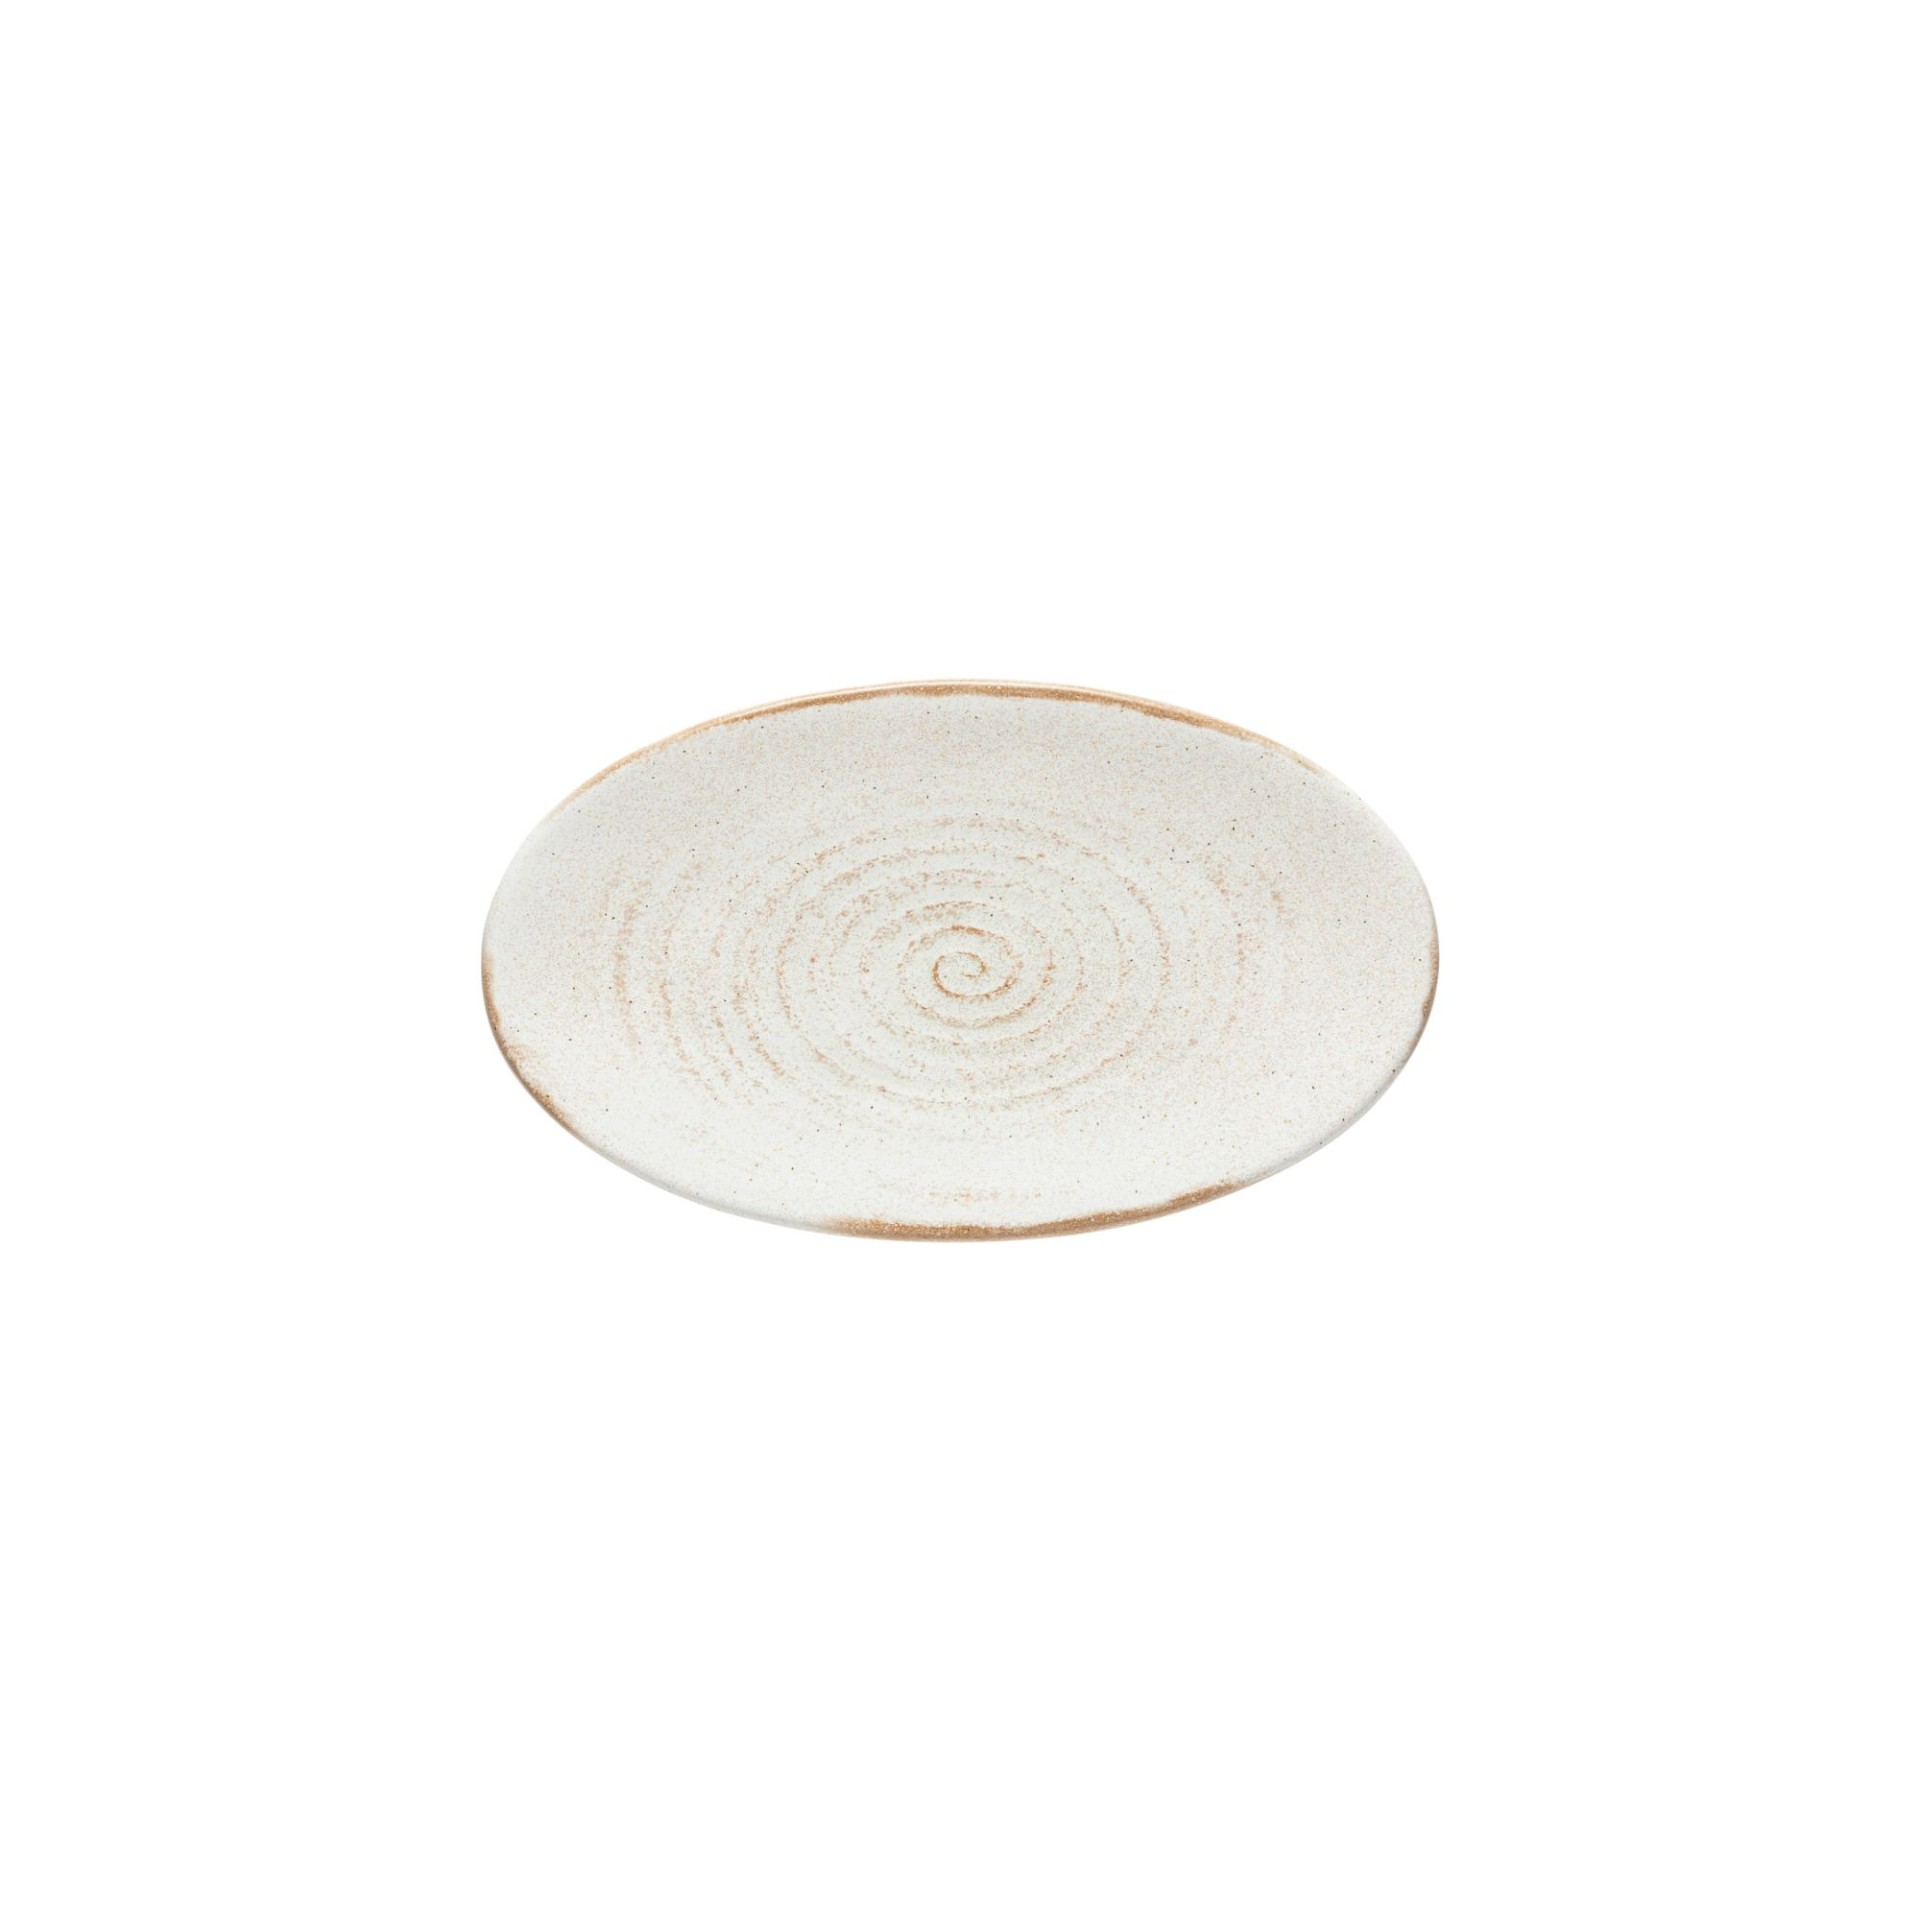 Oval Plate / Platter Vermont by Casafina